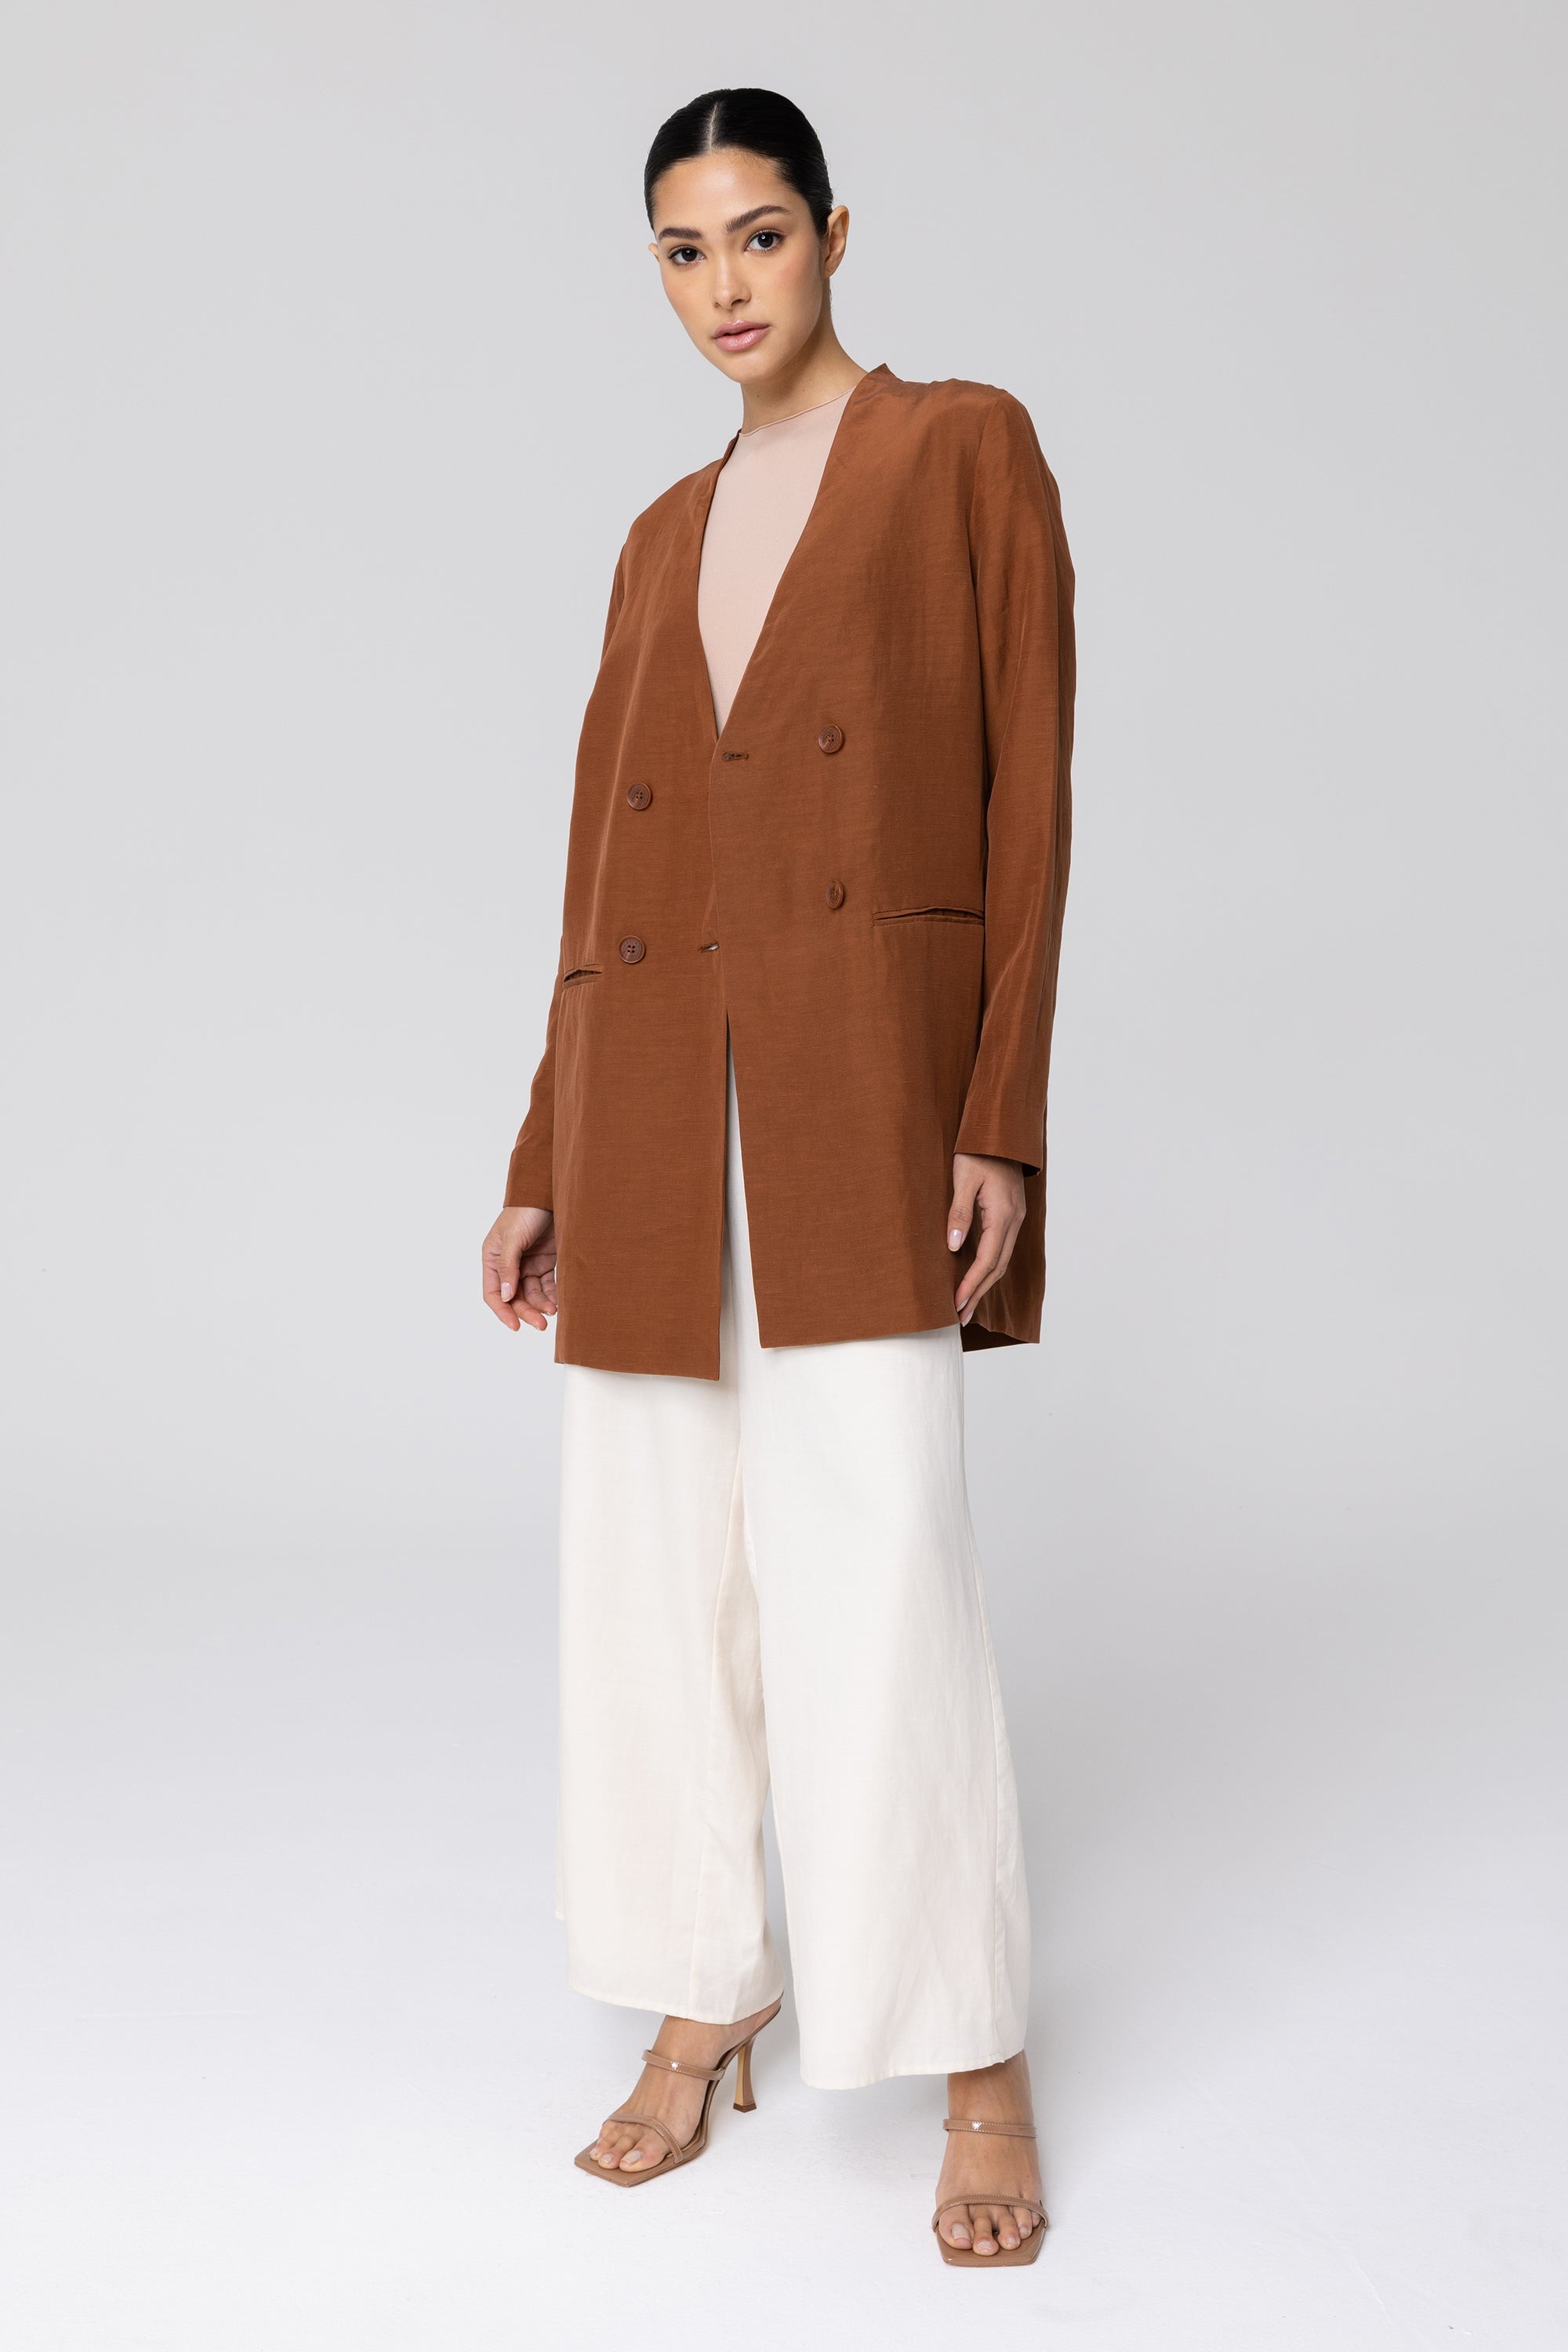 Longline Cupro Linen Oversized Blazer - Baked Clay Veiled Collection 